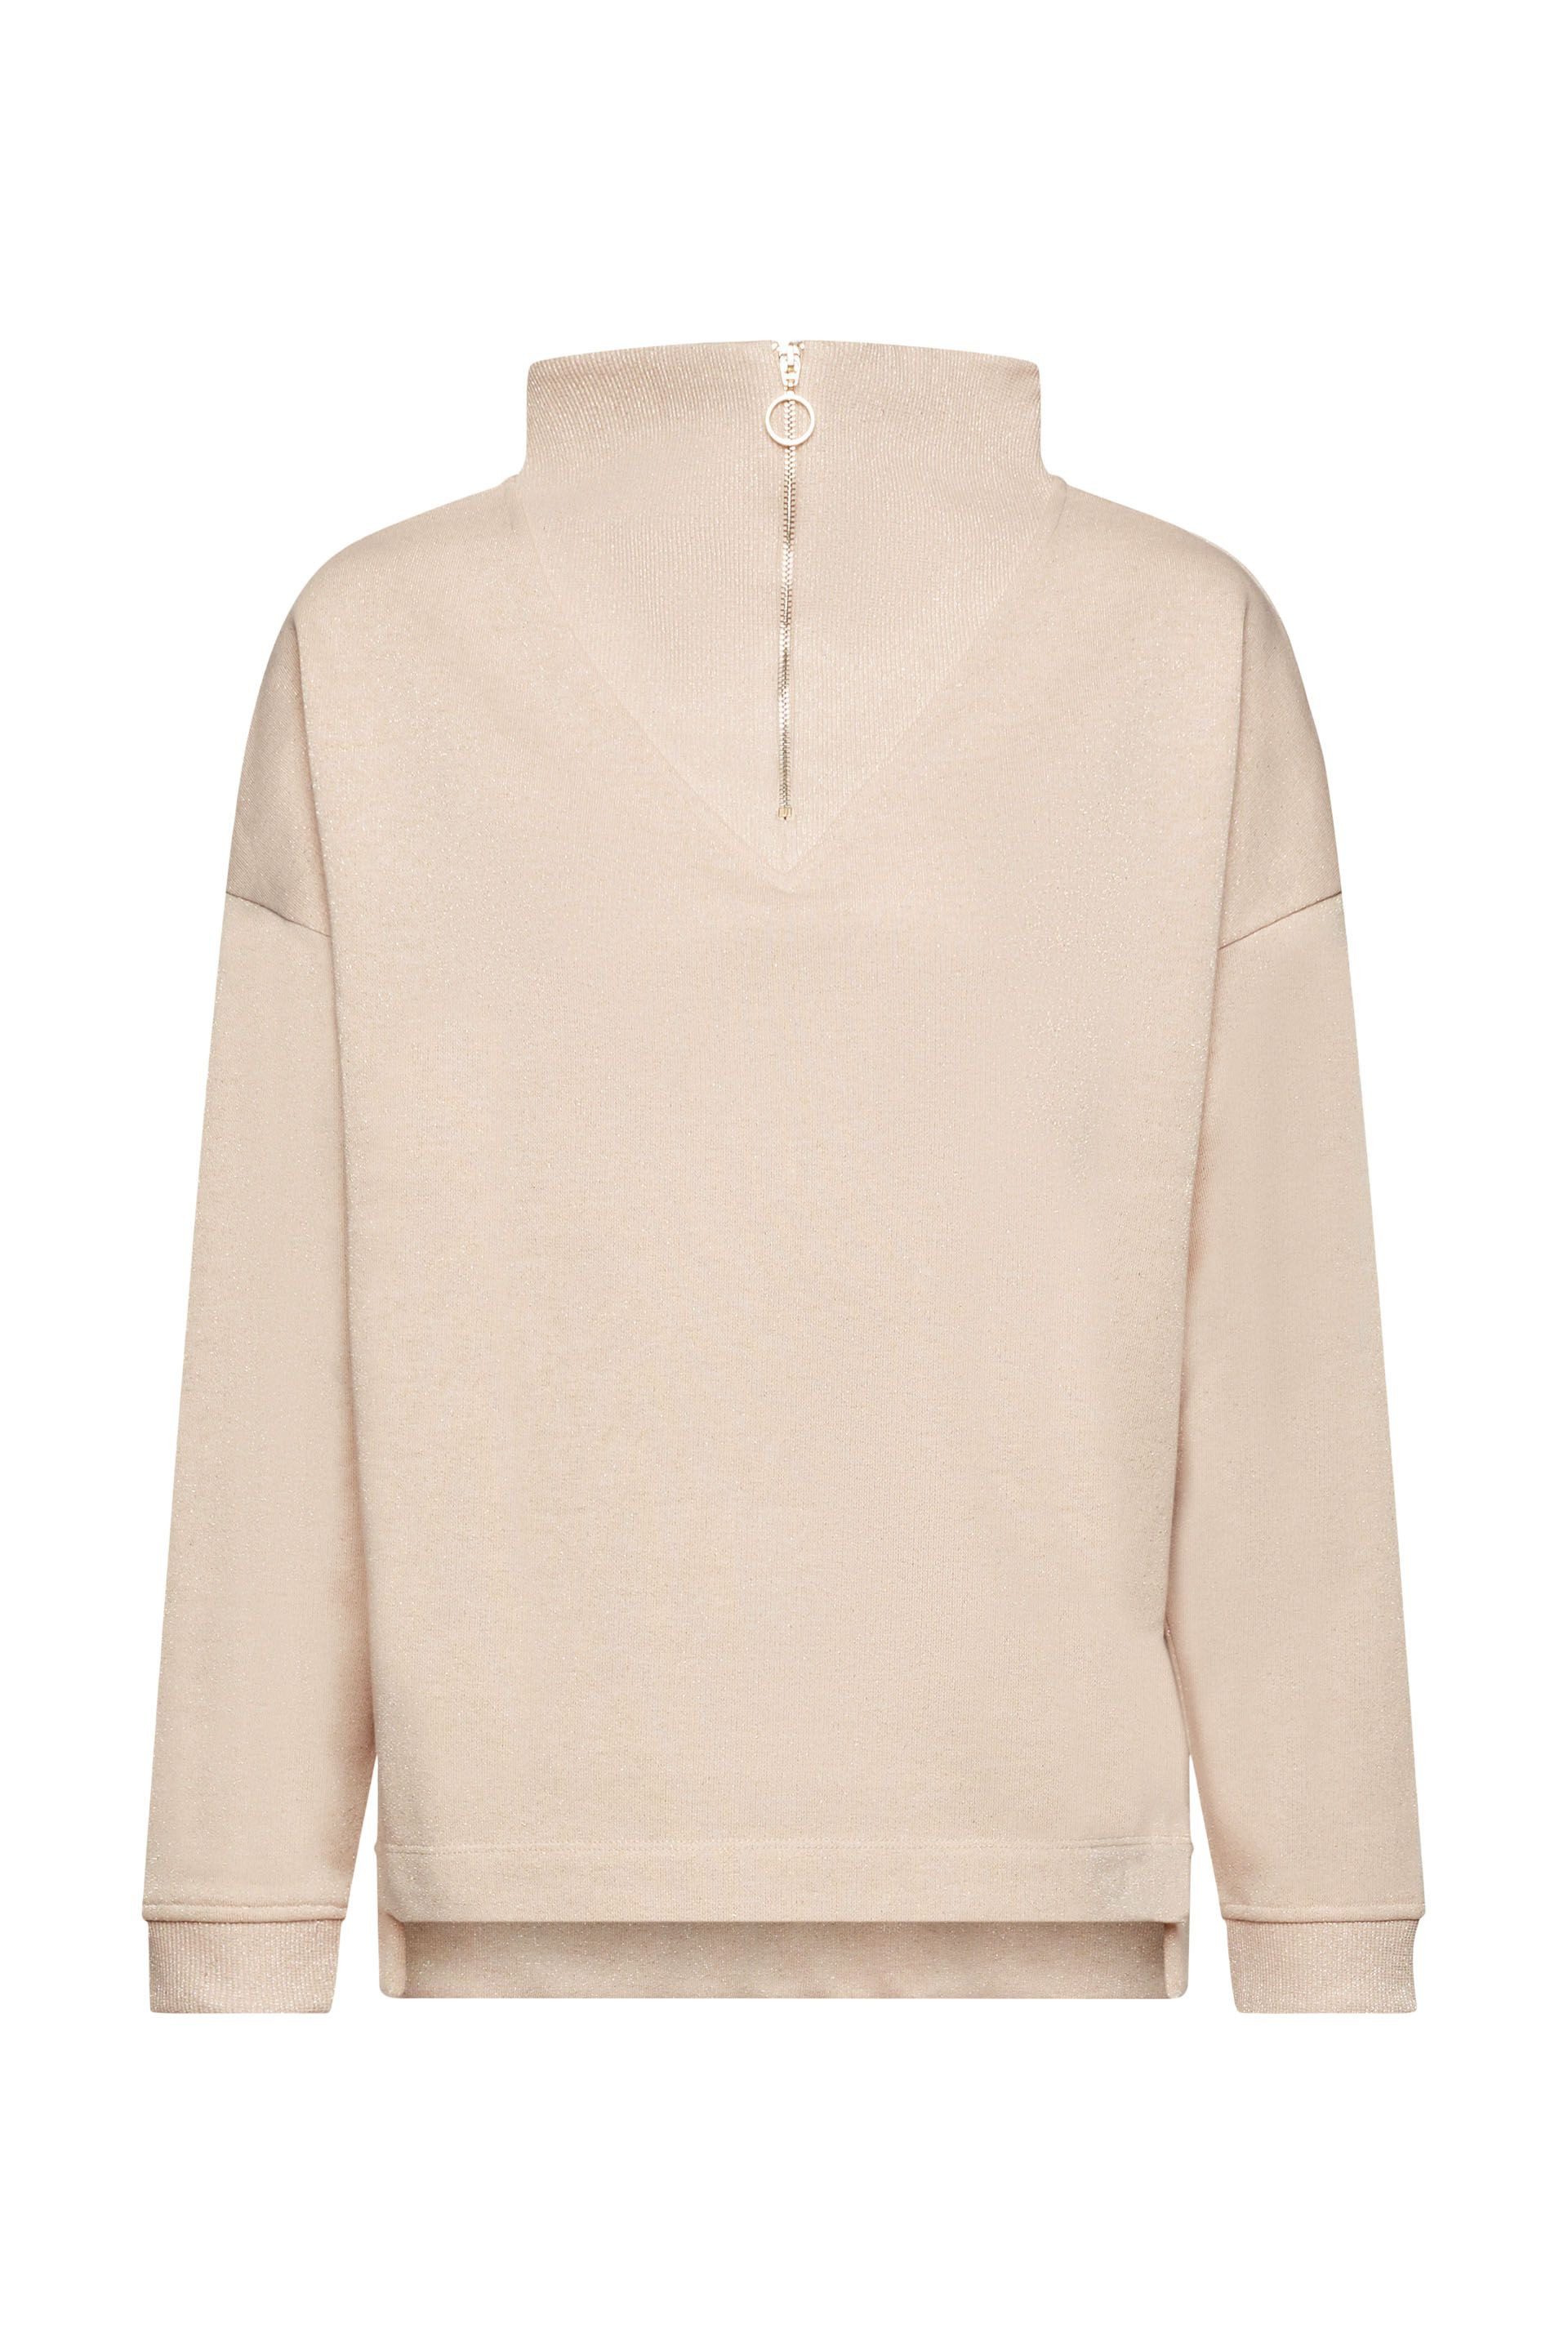 Esprit - Oversized sweatshirt with glitter effect in cotton blend, Natural, large image number 0